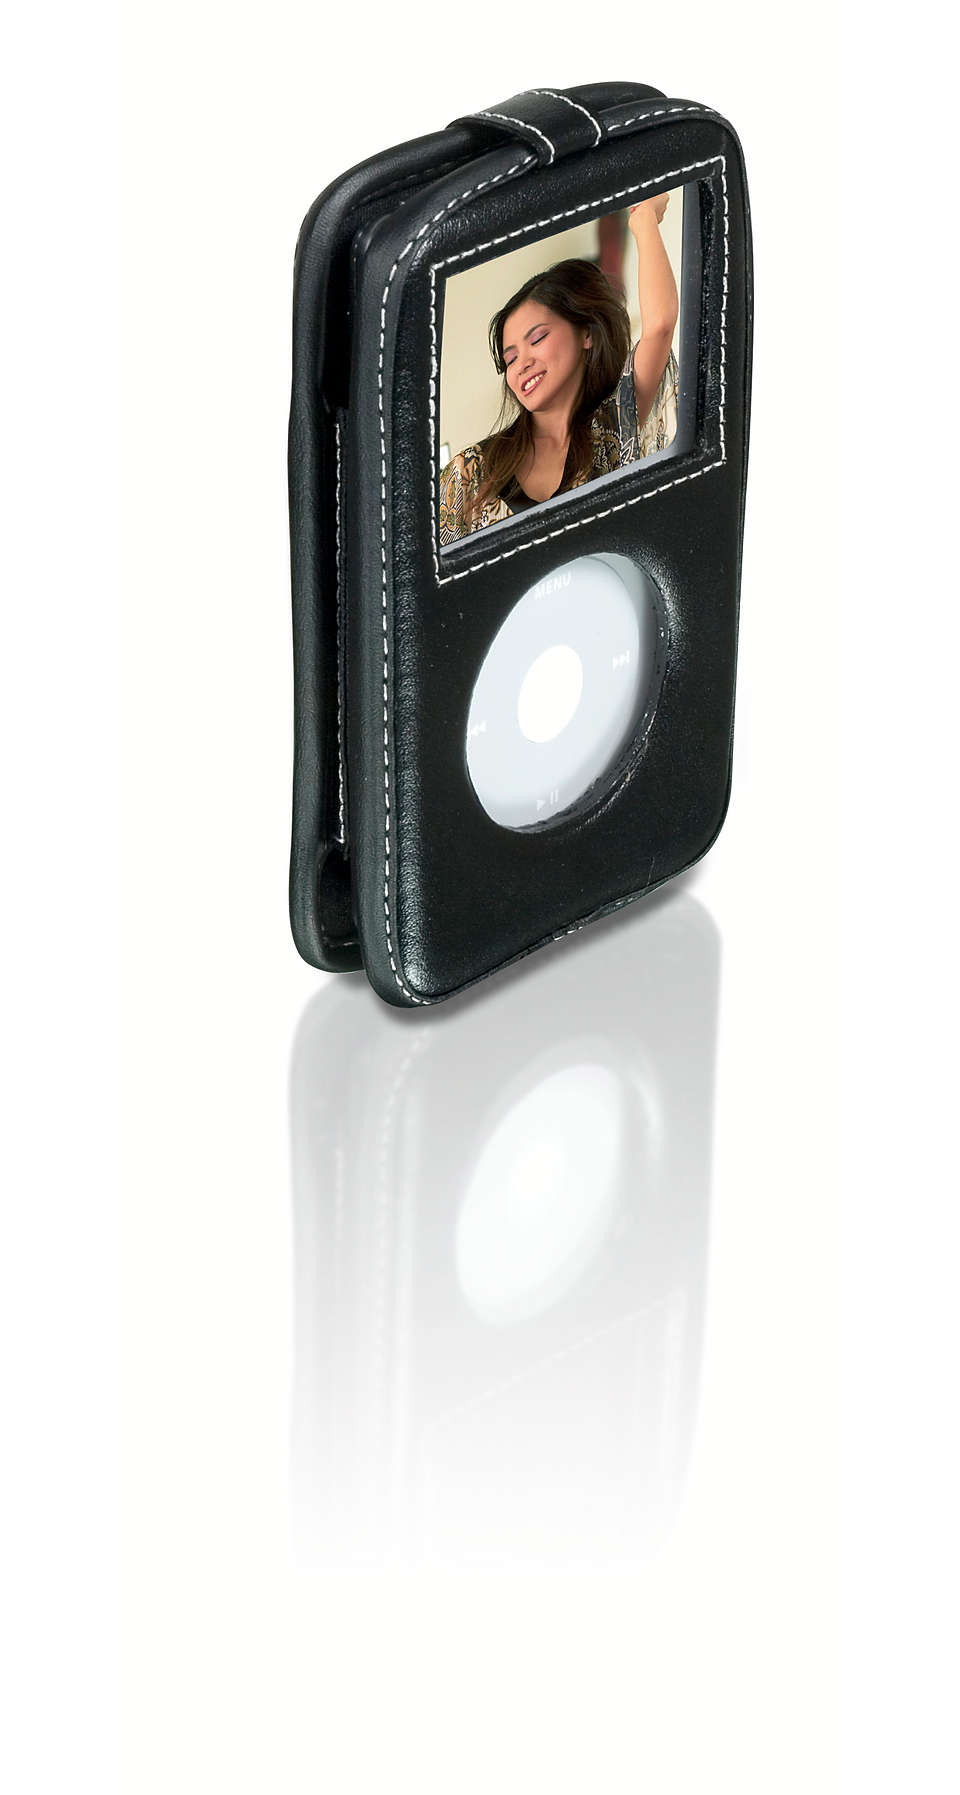 Protect your iPod in style